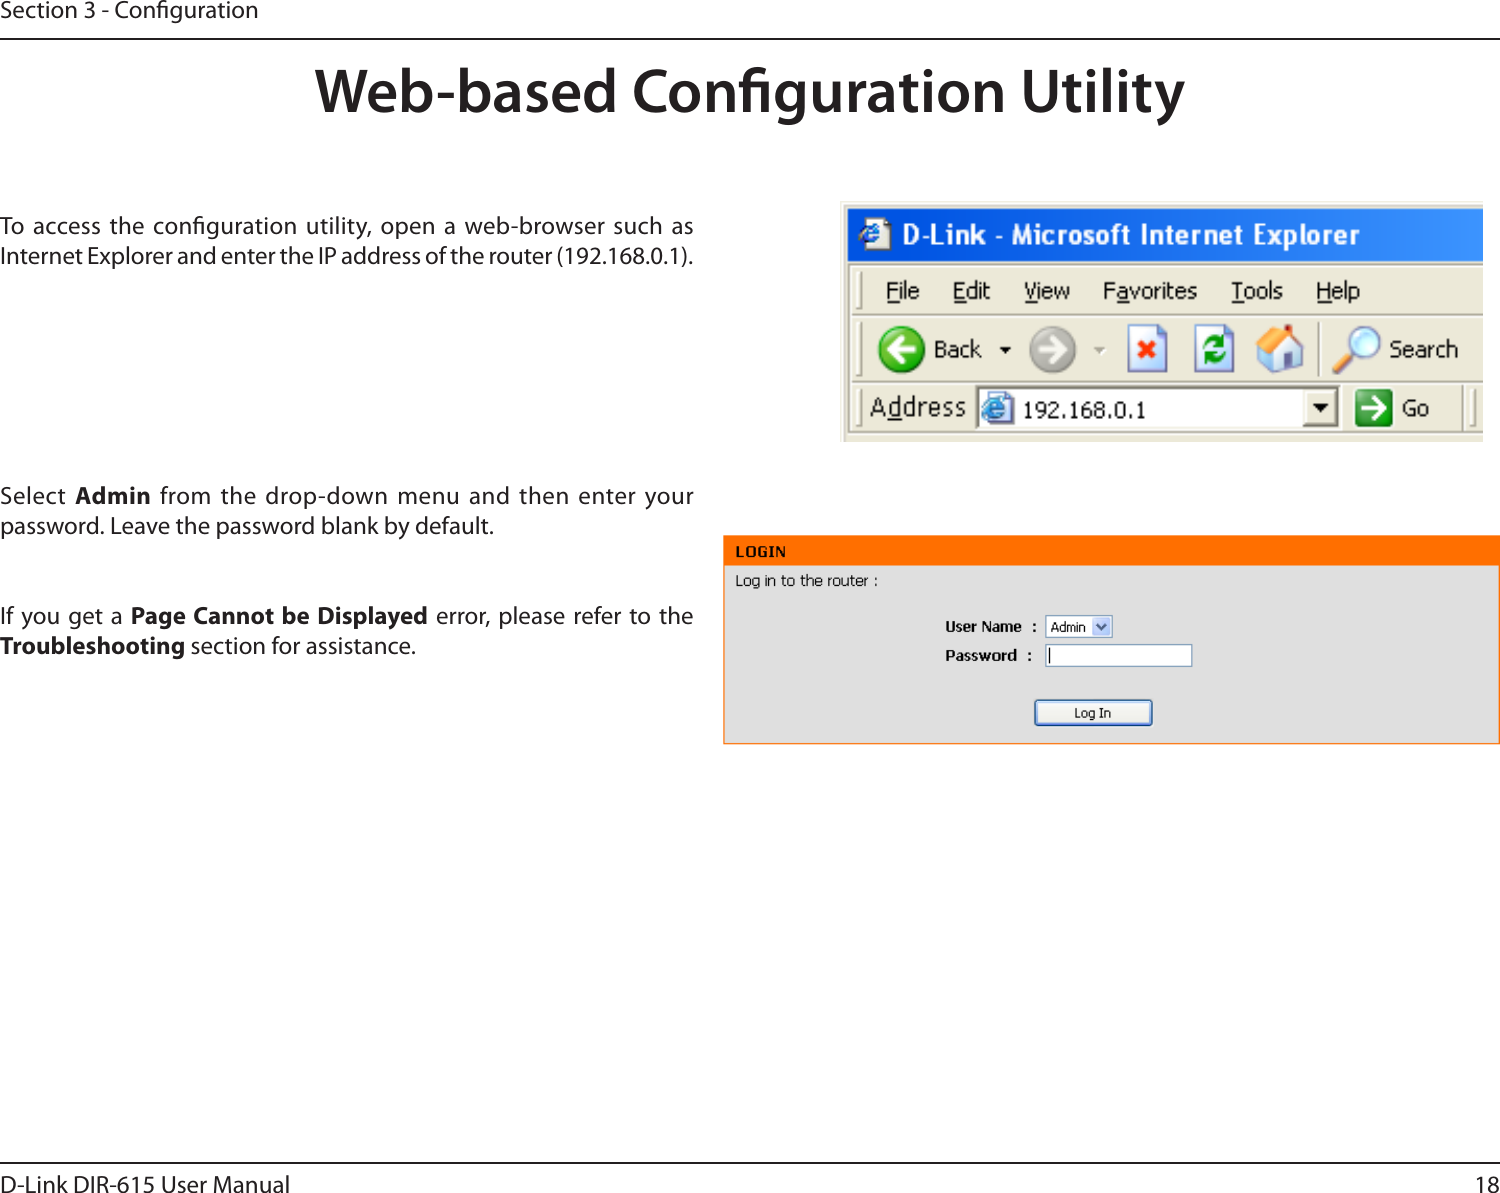 18D-Link DIR-615 User ManualSection 3 - CongurationWeb-based Conguration UtilityTo access the conguration utility,  open a web-browser such  as Internet Explorer and enter the IP address of the router (192.168.0.1).Select  Admin from the drop-down menu  and  then enter your password. Leave the password blank by default.If you get a Page Cannot be Displayed  error, please refer to the Troubleshooting section for assistance.